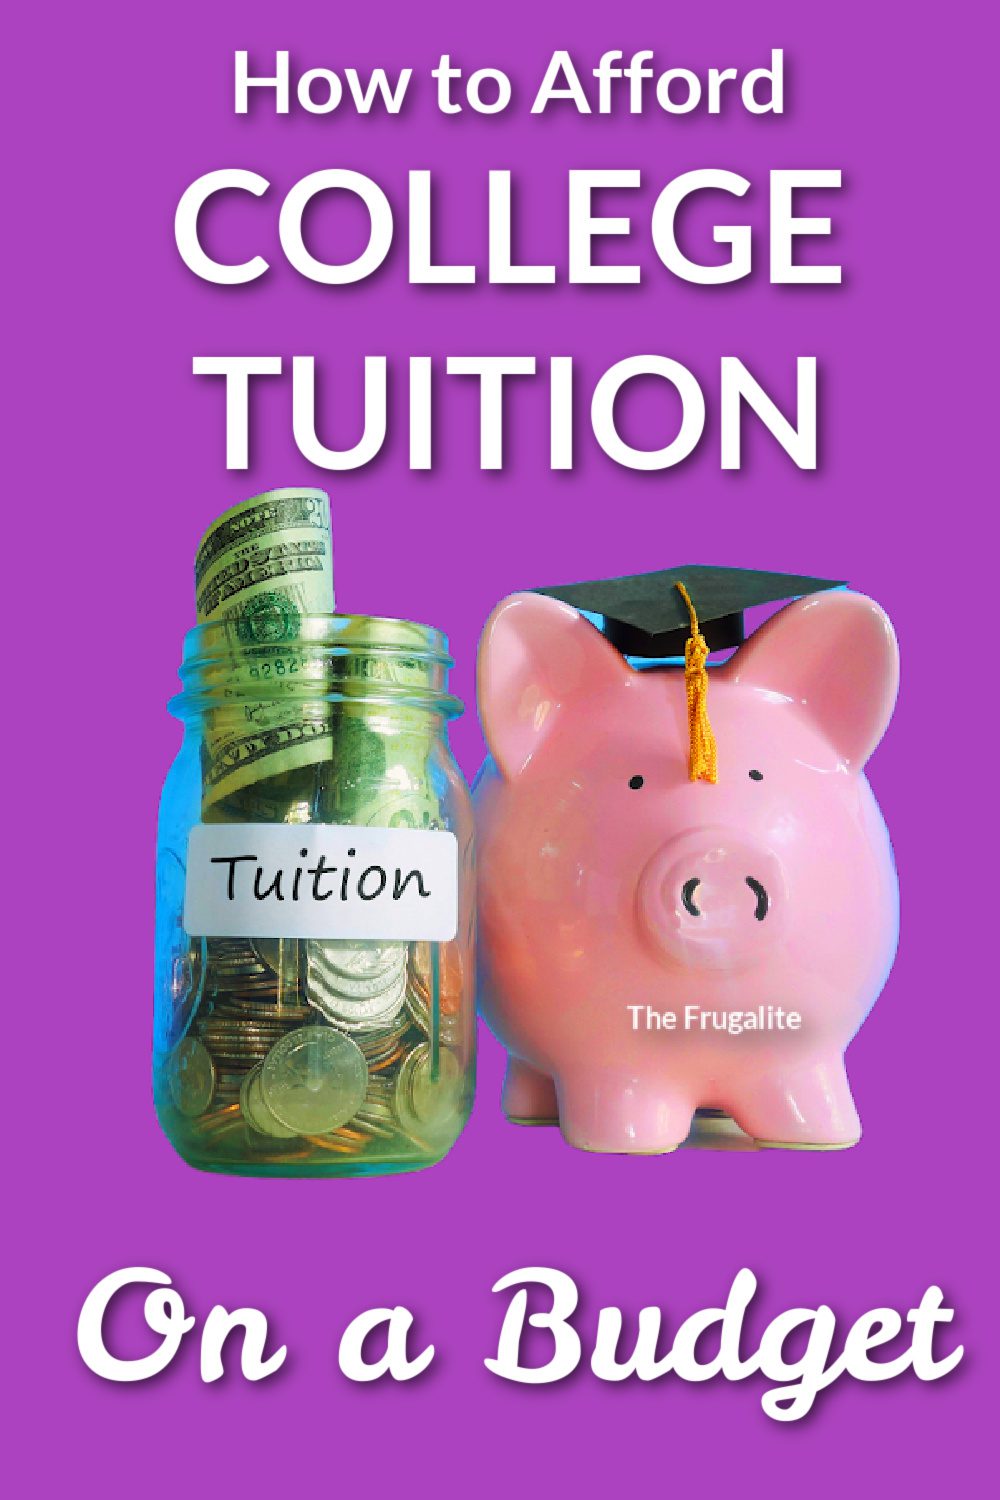 How to Afford College Tuition on a Budget